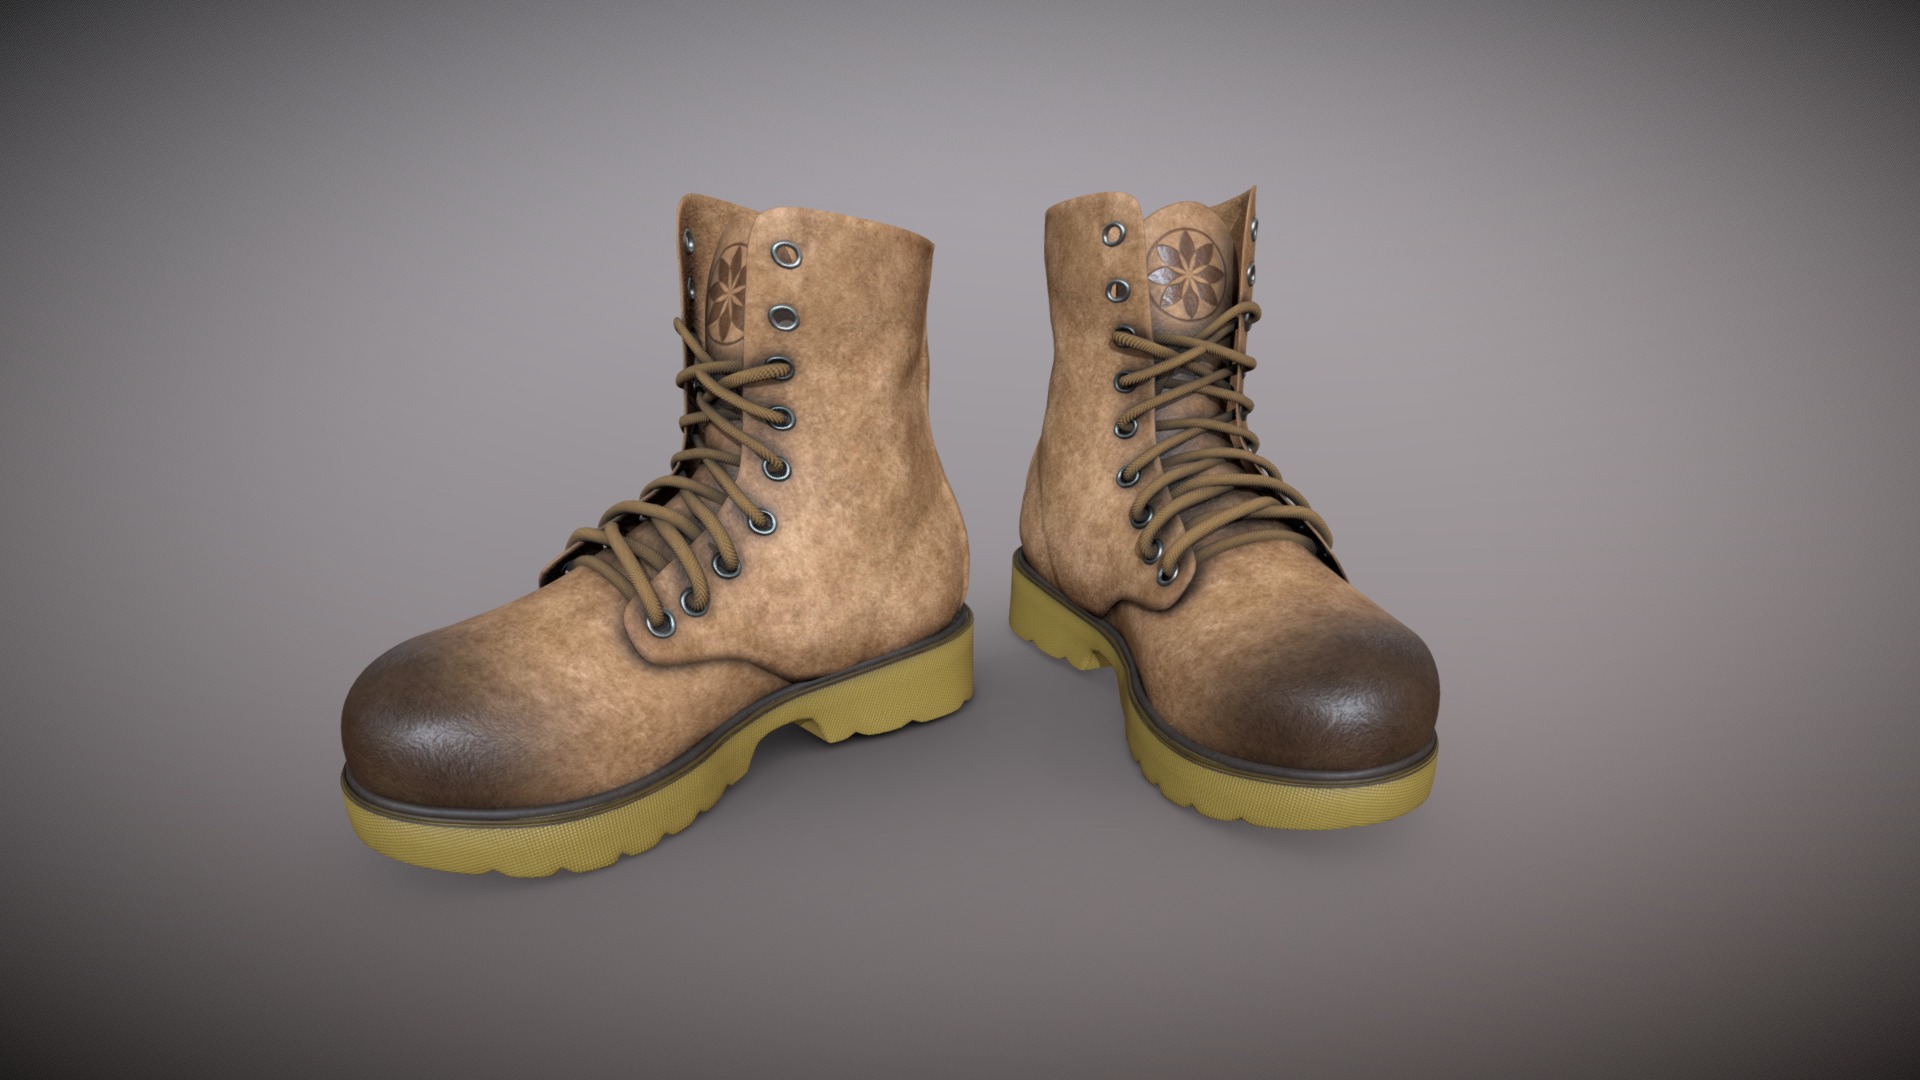 3D model SHOES - This is a 3D model of the SHOES. The 3D model is about a pair of brown boots.